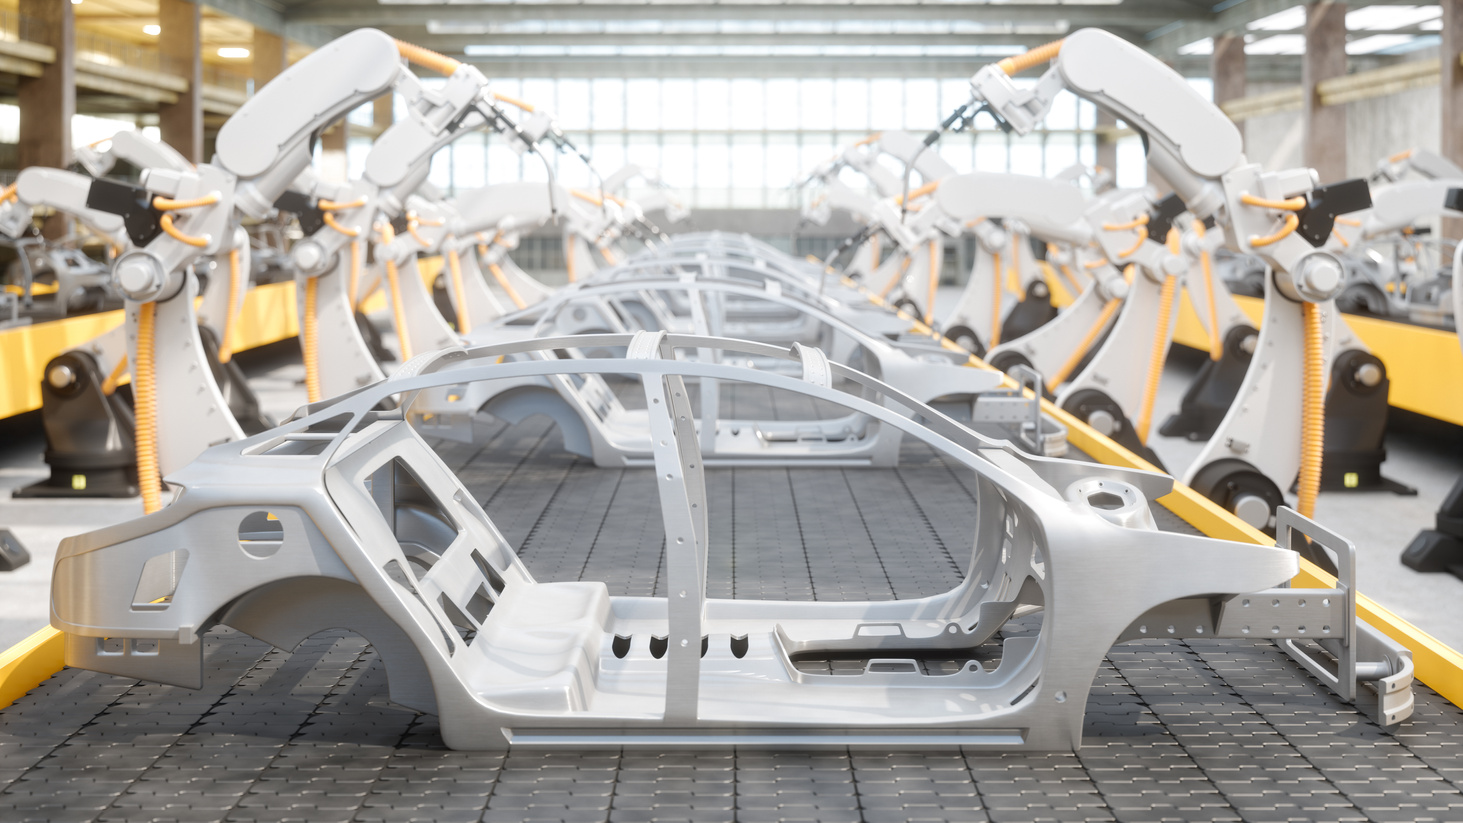 Industry 4.0 - Industrial Robots At The Automatic Car Manufacturing Factory Assembly Line